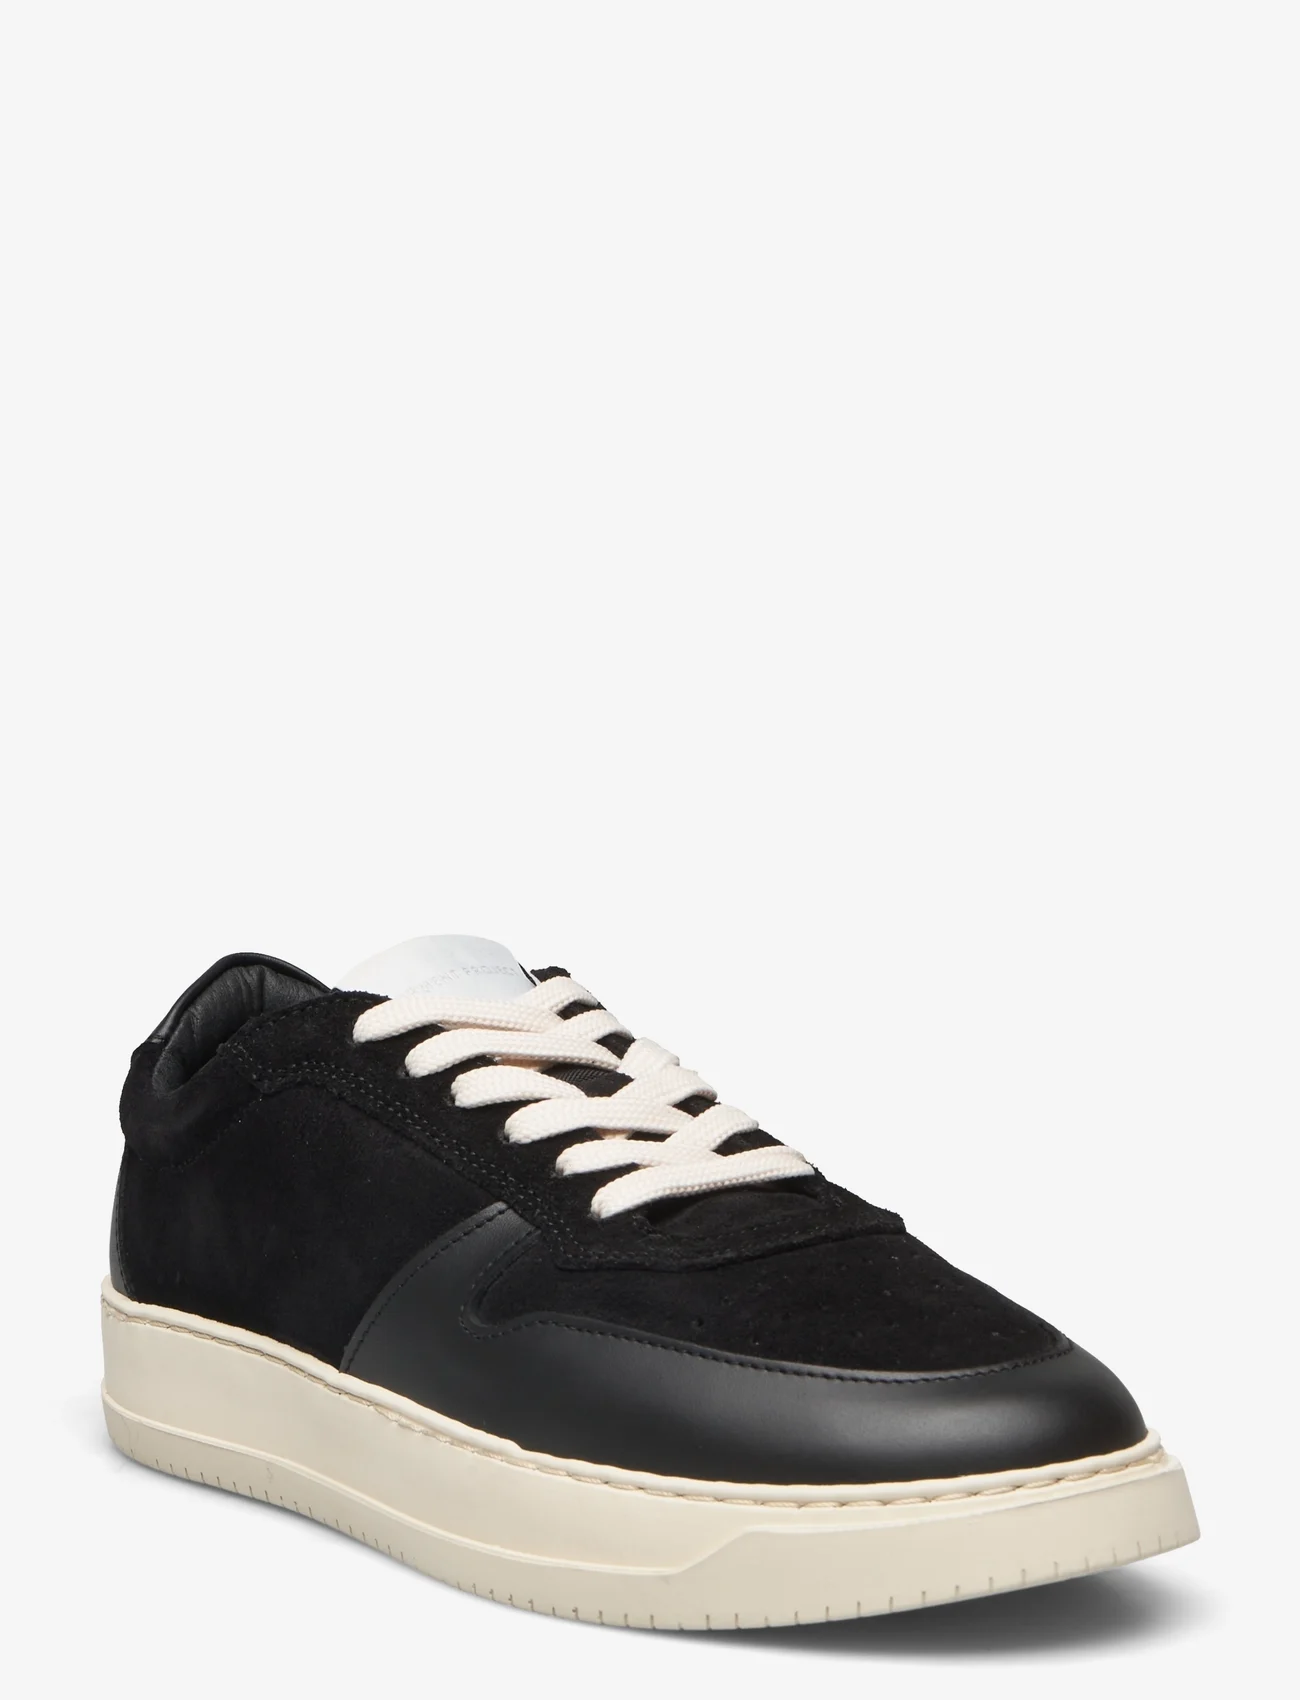 Garment Project - Legacy - Black Mix - low top sneakers - black - 0